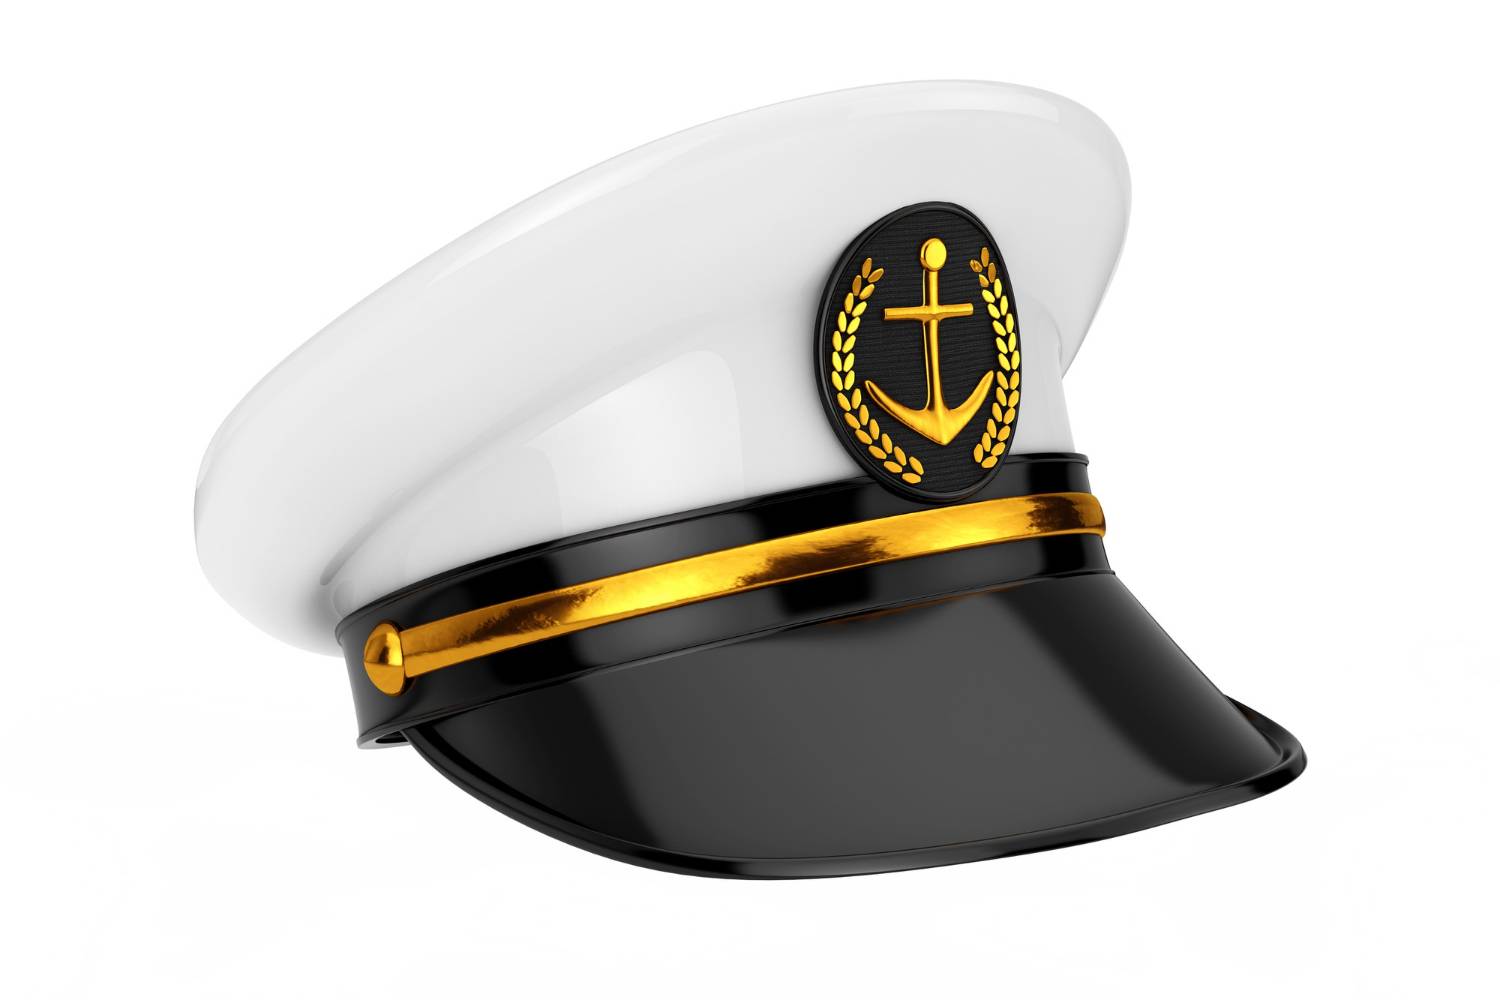 A captain's white hat with a gold anchor emblem, symbolizing leadership on 11-person pontoon boats.